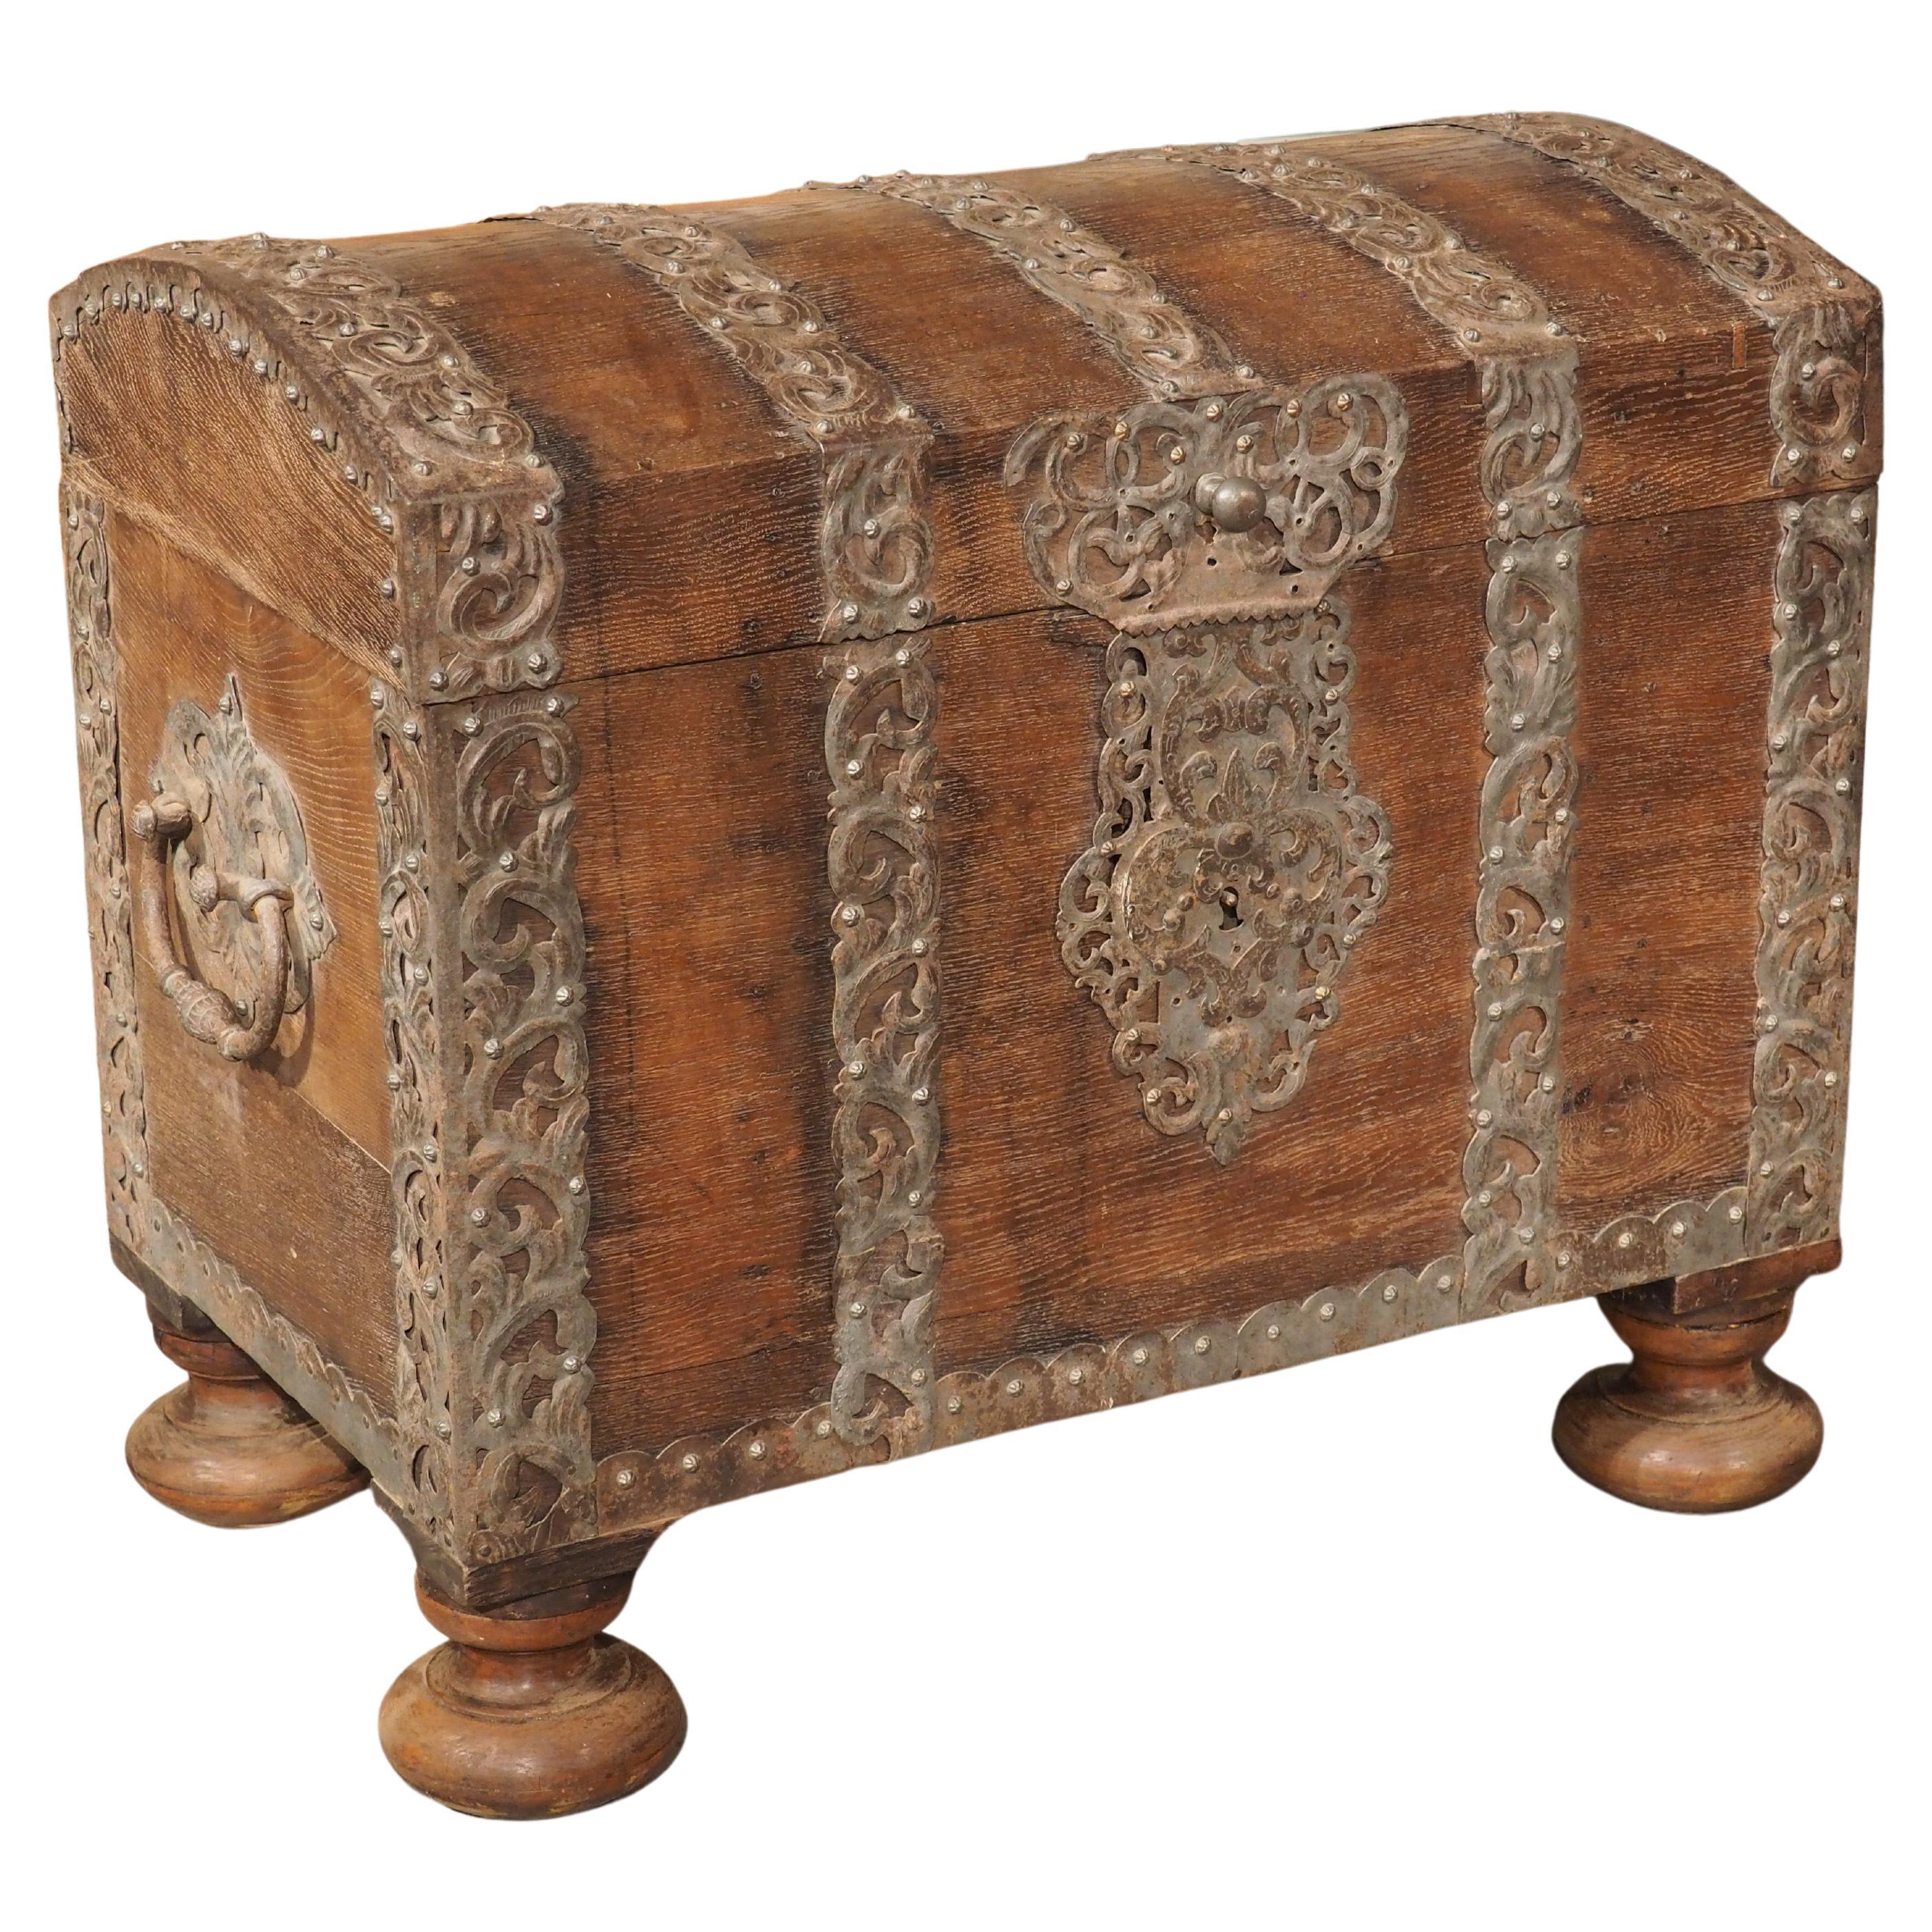 Period Louis XIV Oak and Iron Domed Trunk, Northeast France, Circa 1700